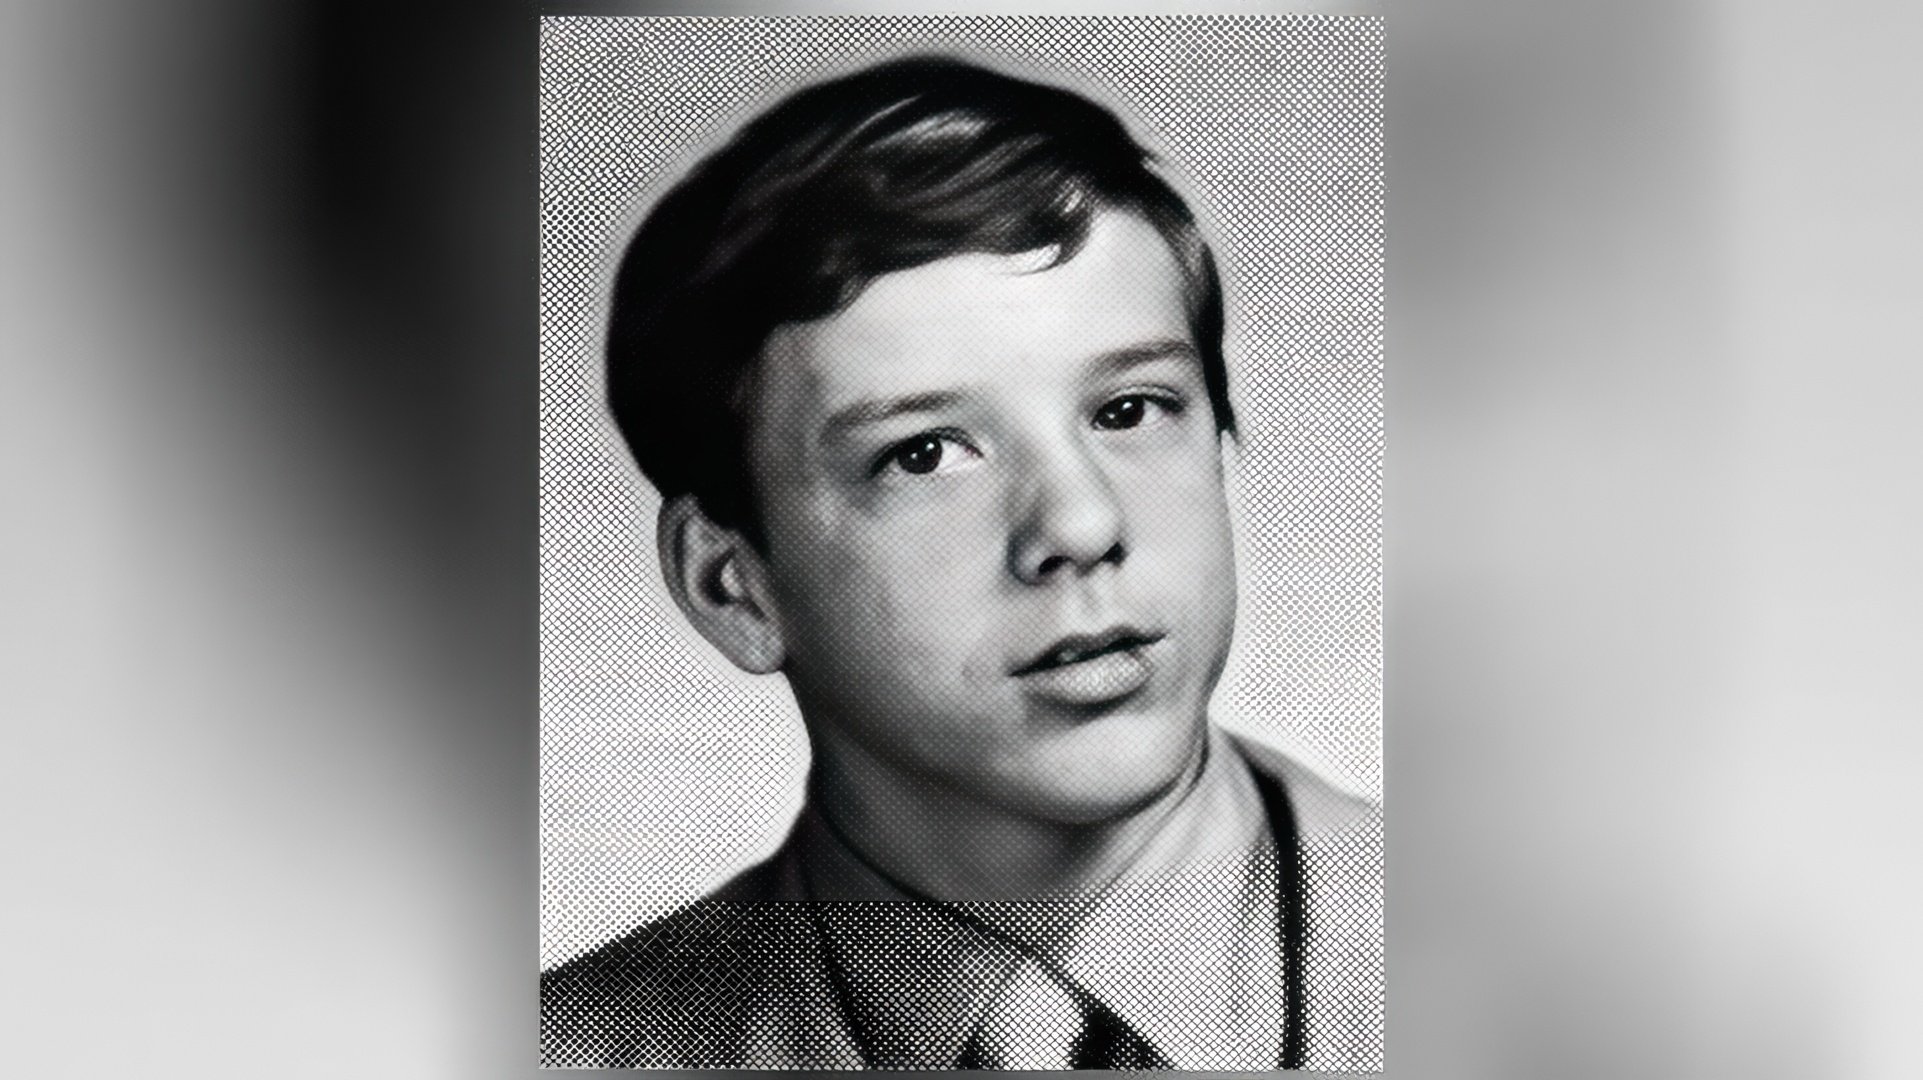 Mickey Rourke as a child